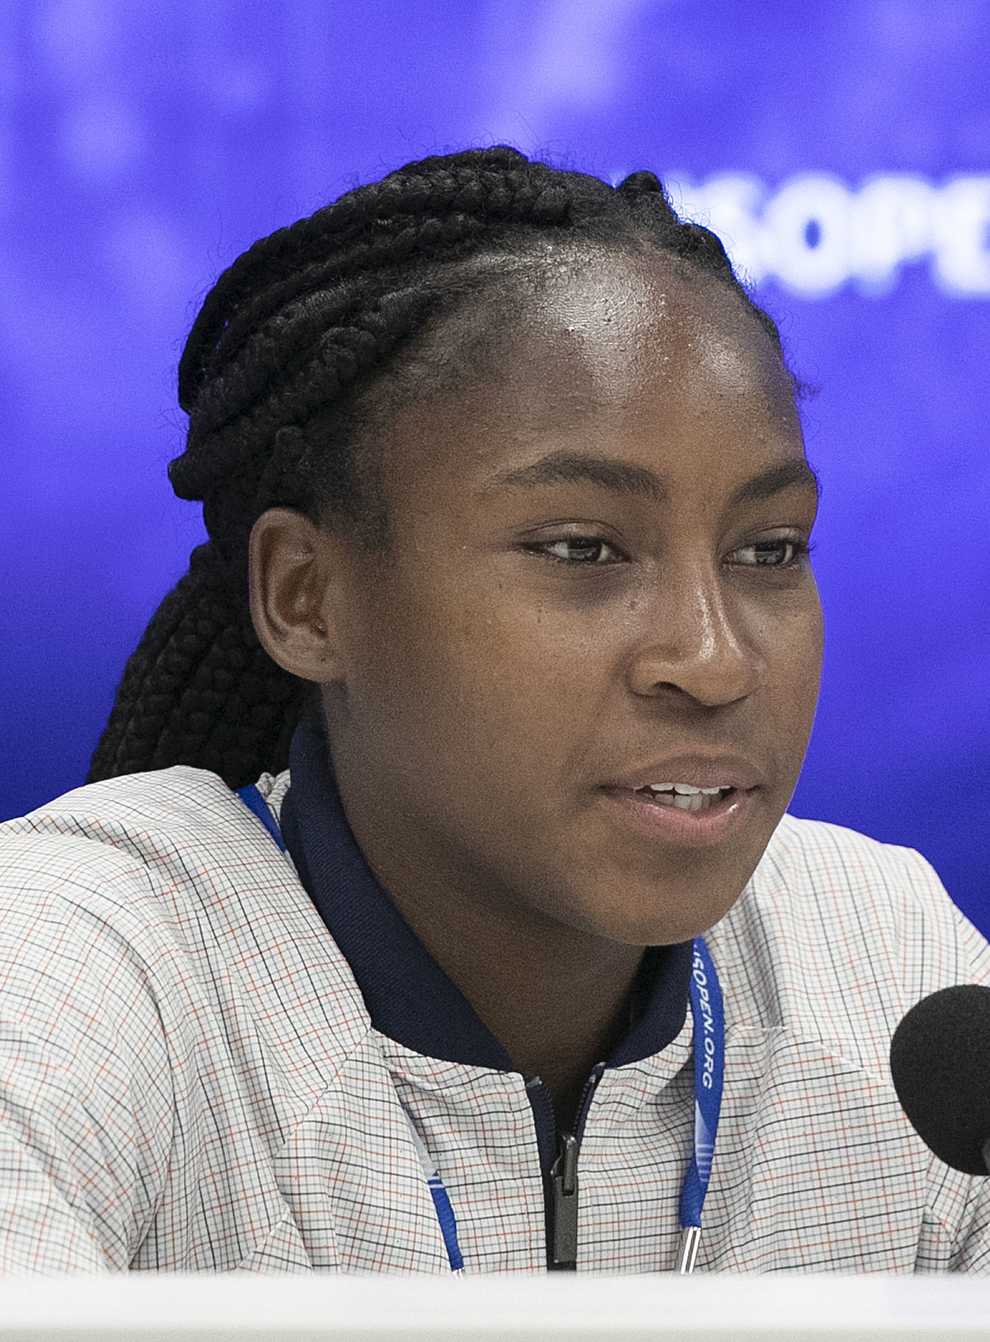 16-year-old Gauff delivered a powerful speech in her hometown of Delray Beach, Florida